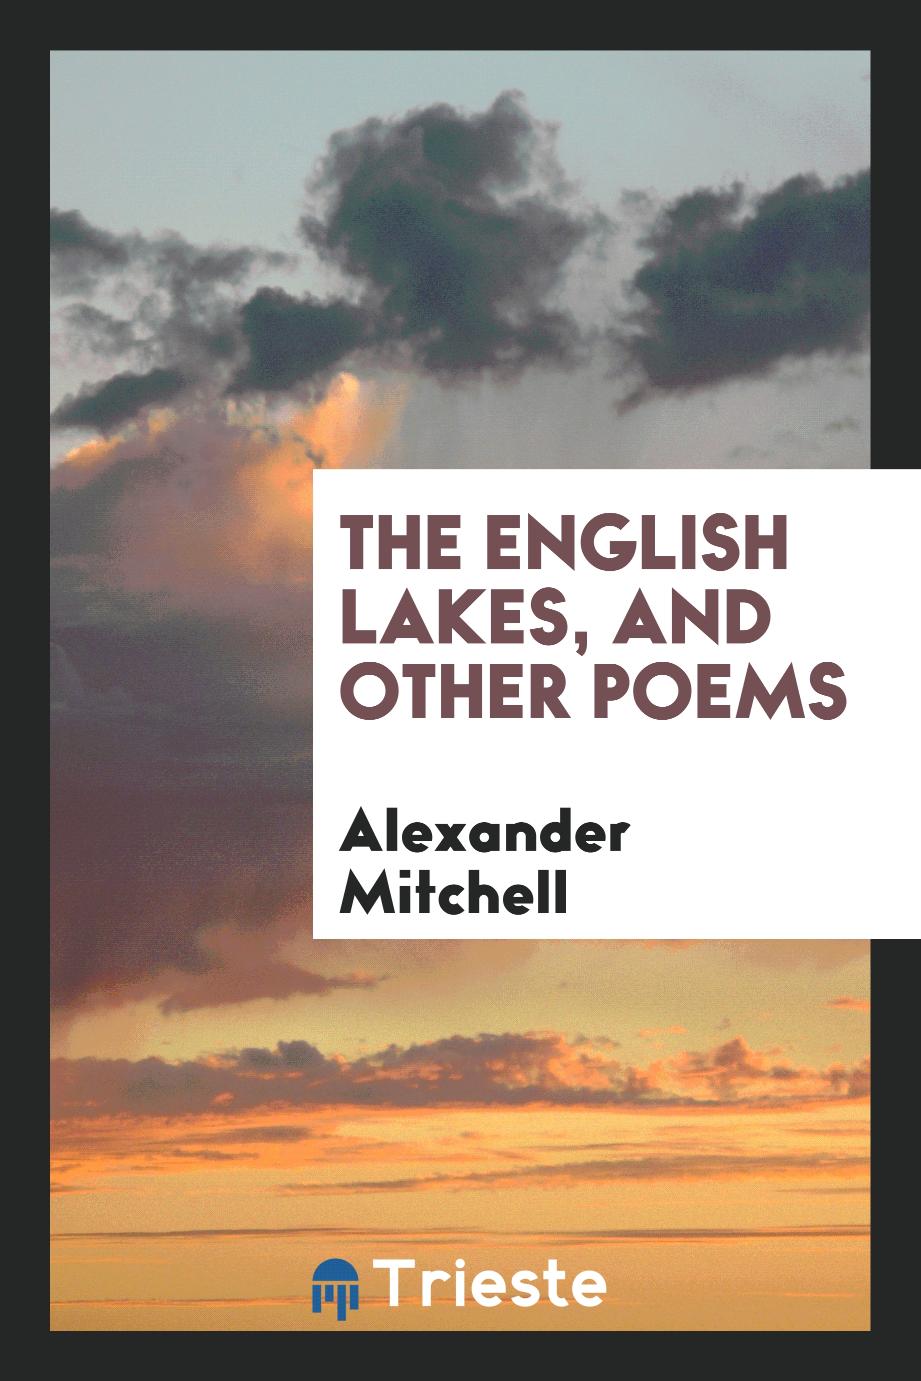 The English Lakes, and Other Poems